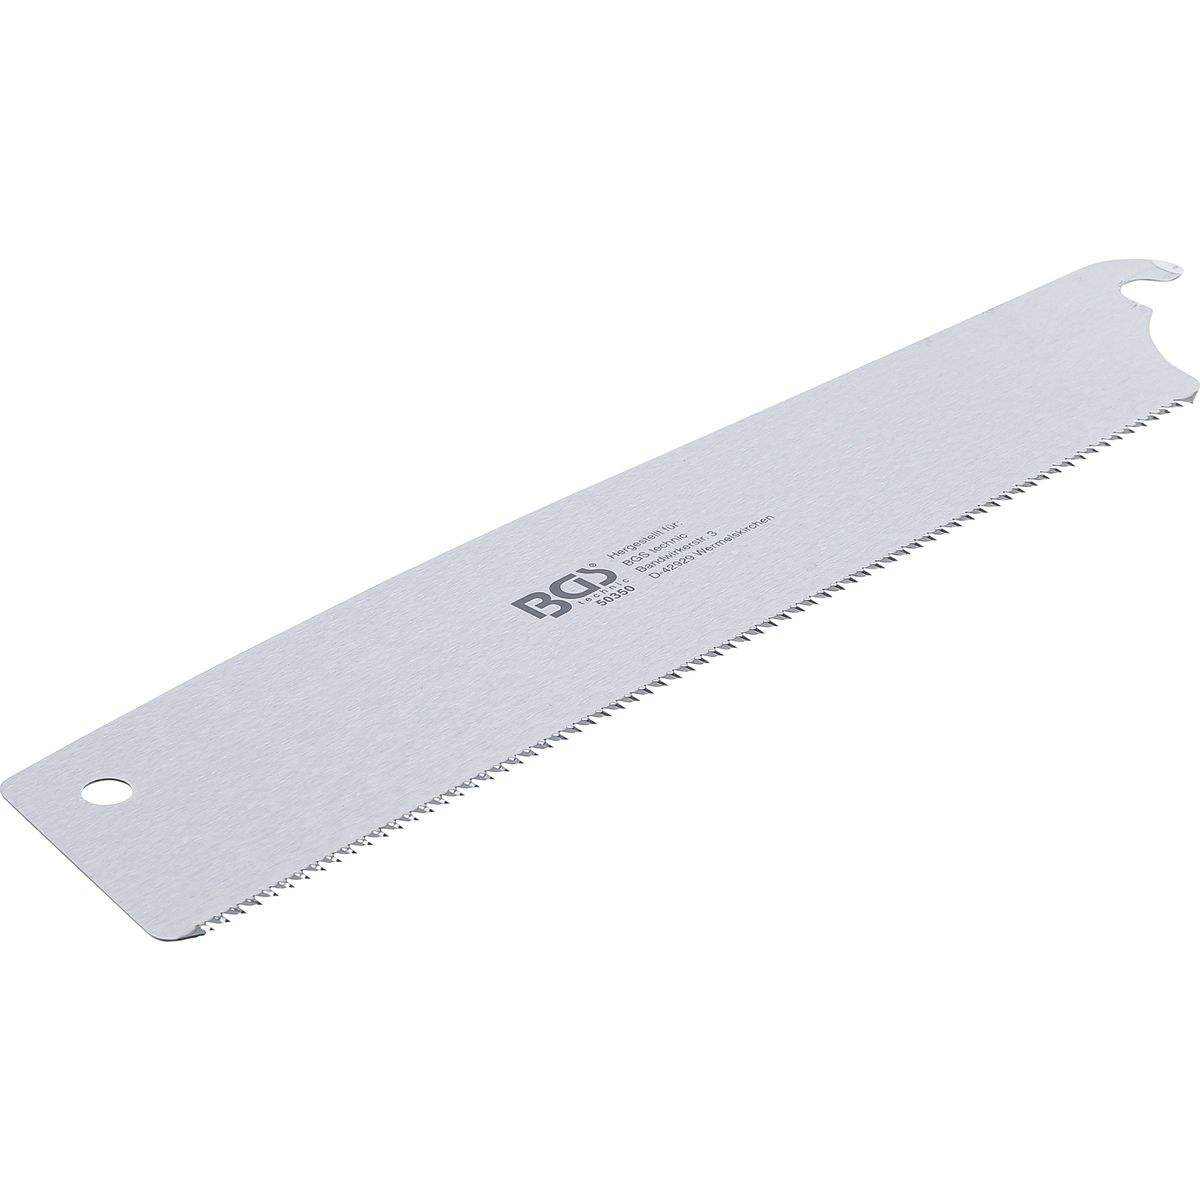 Saw Blade | for BGS 50350